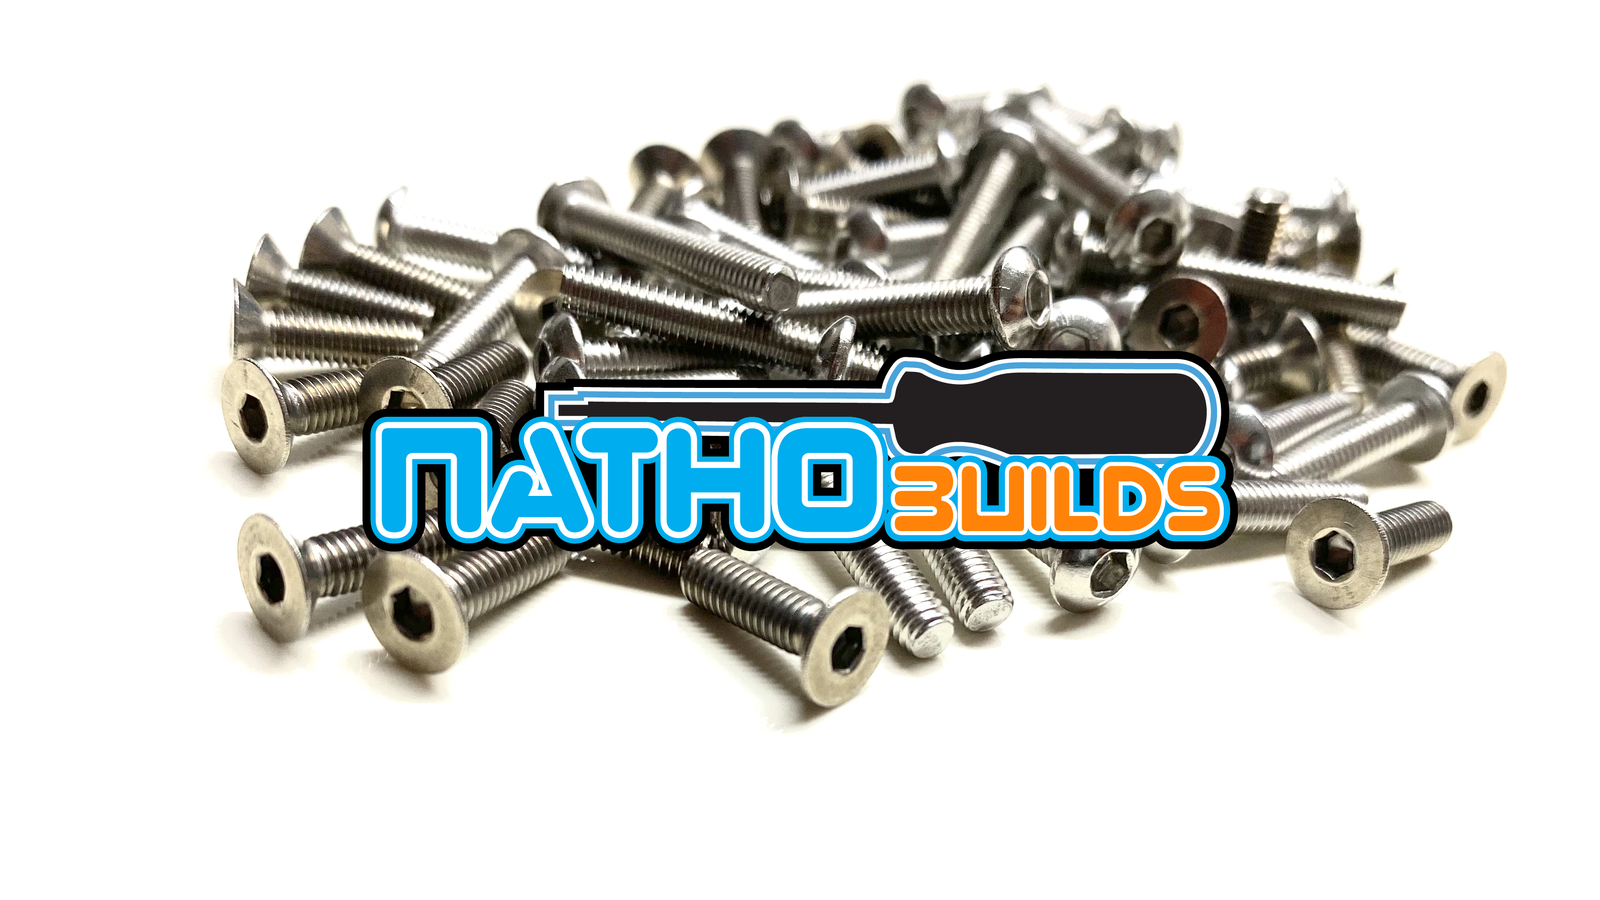 NathoBuilds: Stainless Steel Screw Kits for 1/8th - S-Workz S35-4